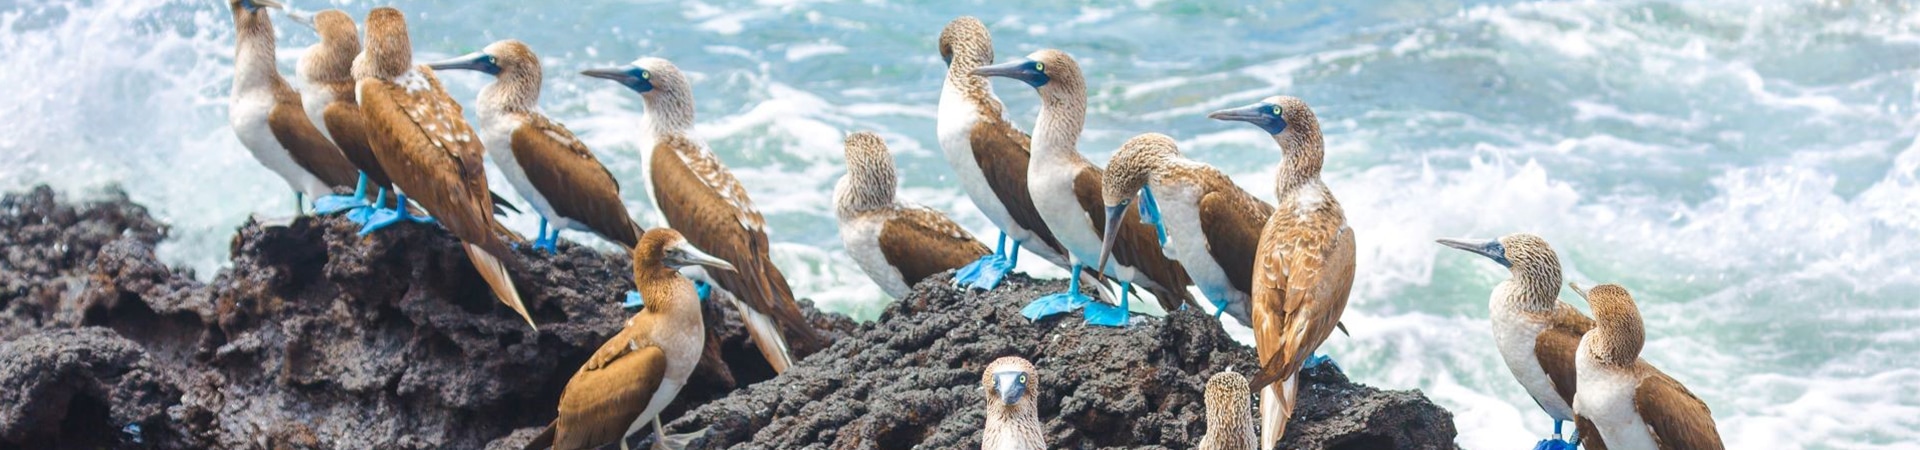 5 fun facts about blue footed booby | Aqua Expeditions